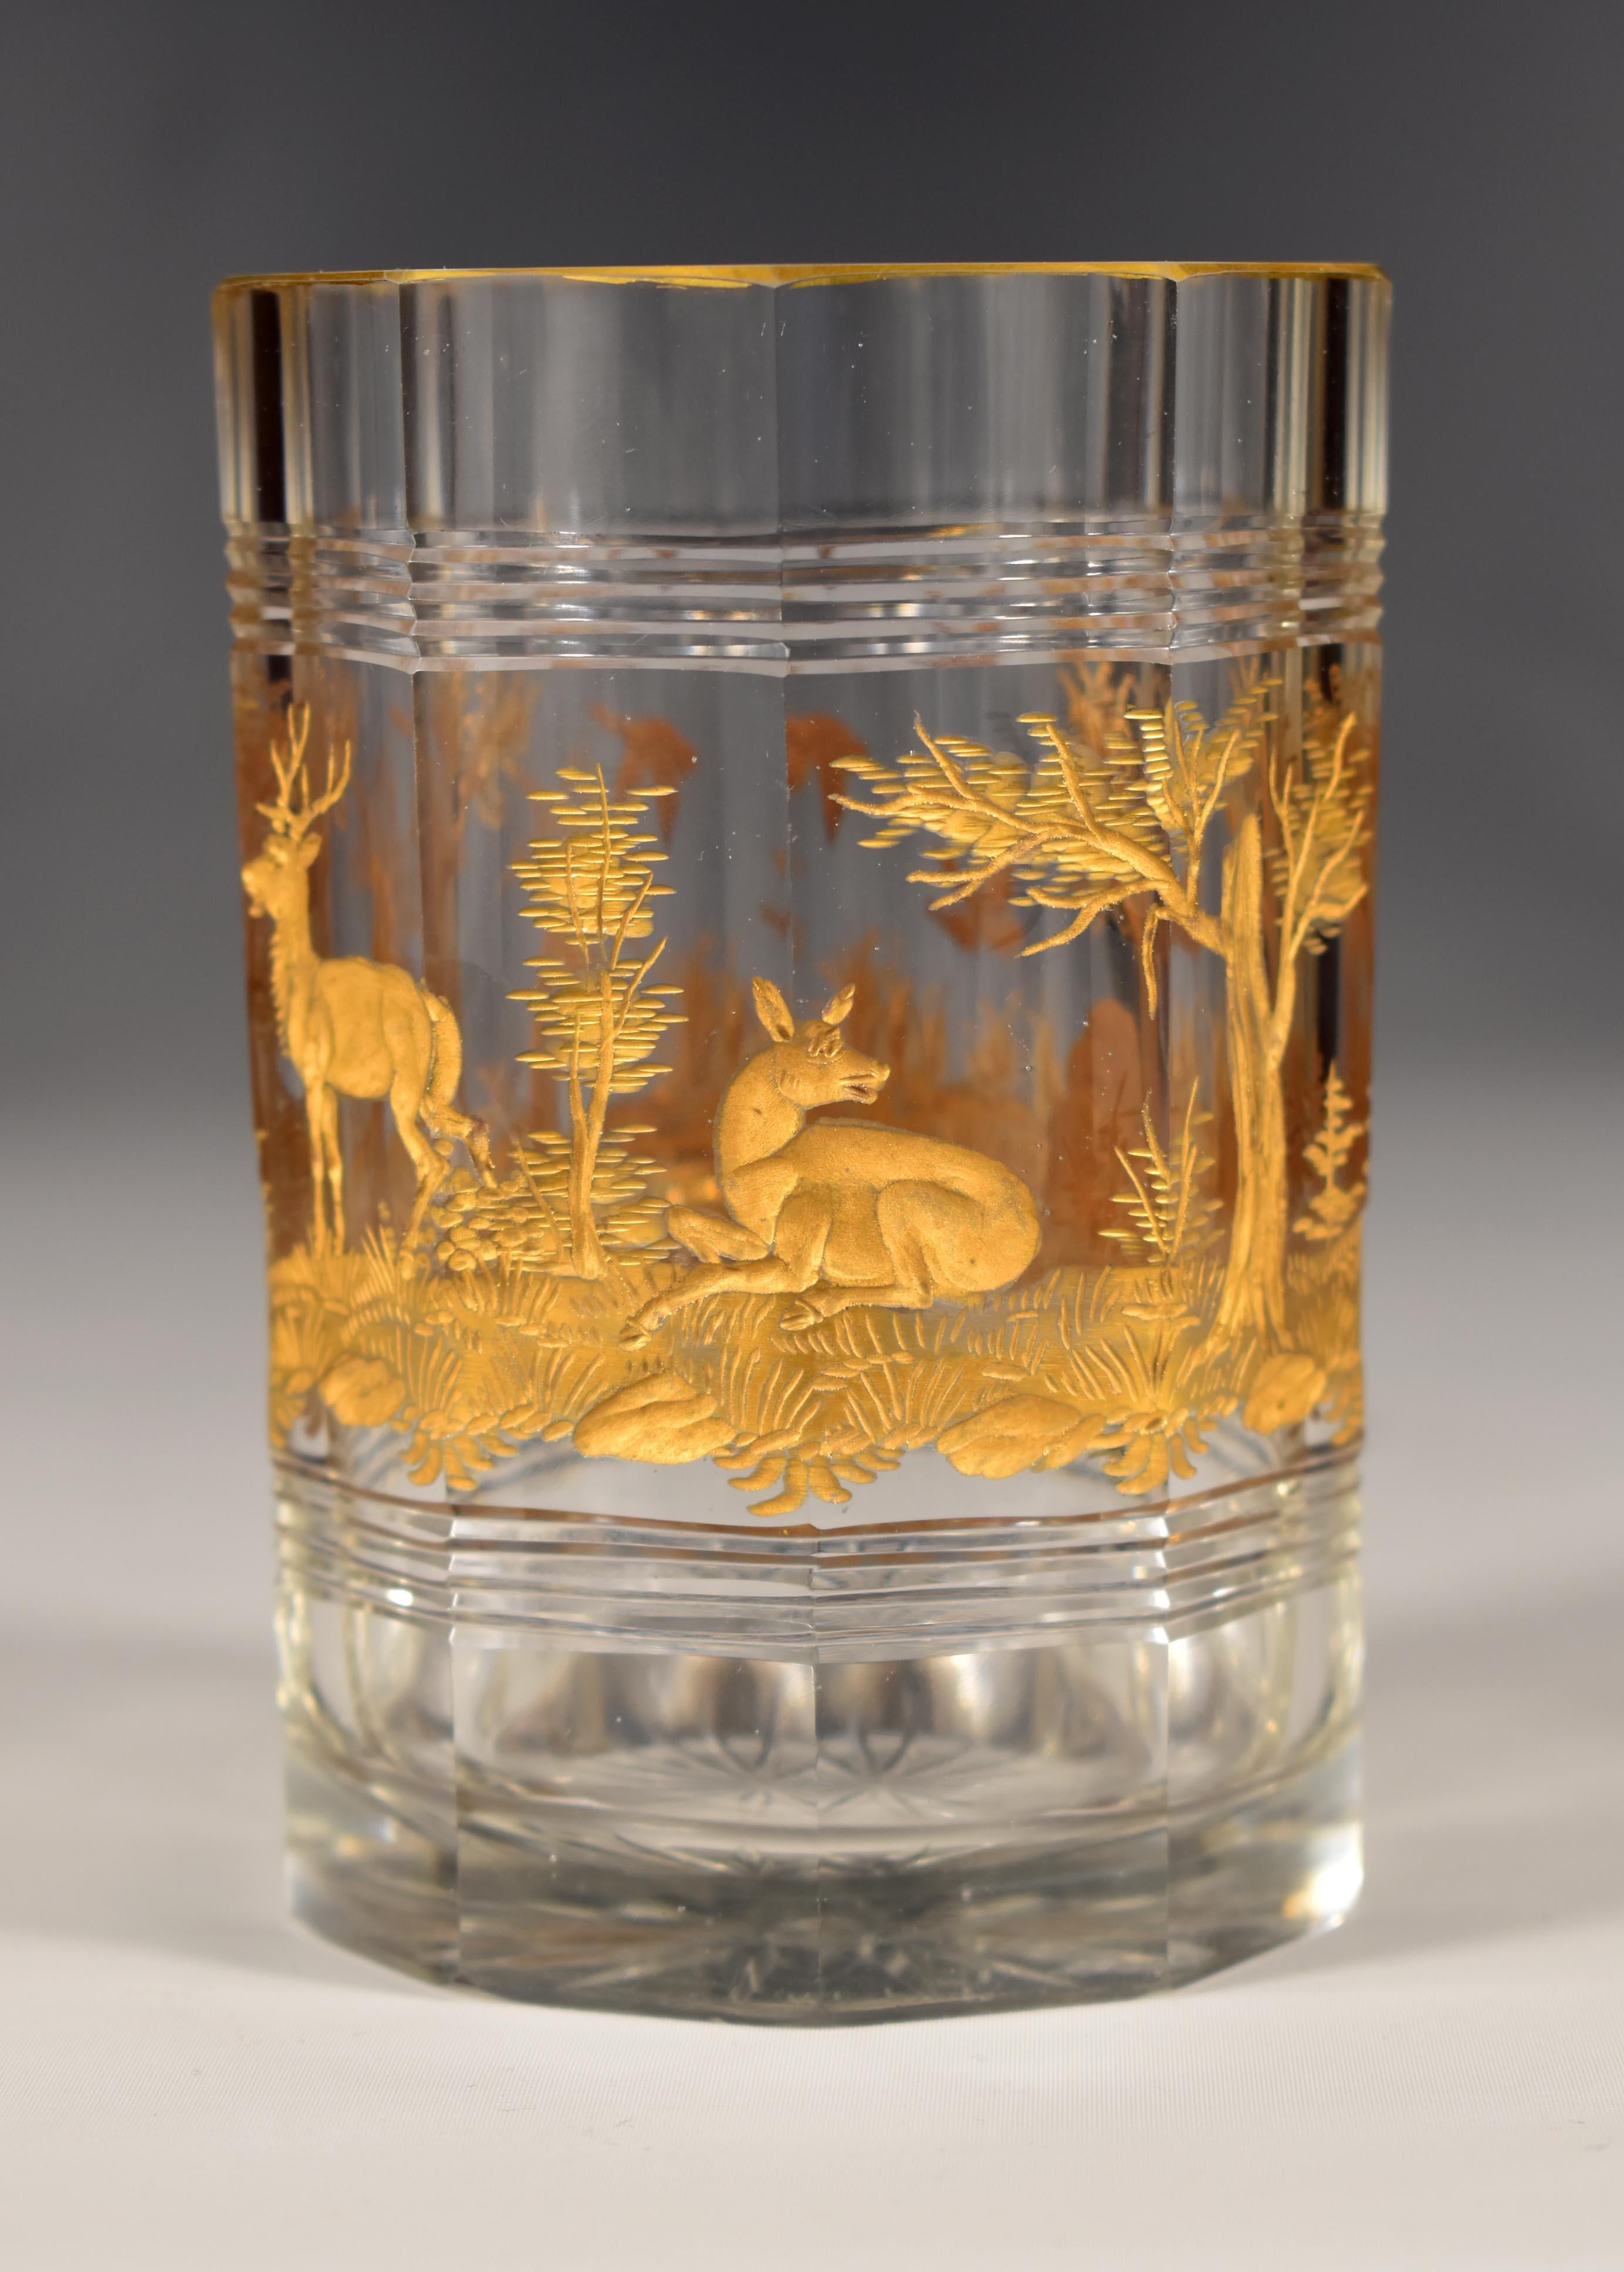 Gilded Vase + Two Gilded Glasses - Hunting motif. 20th century For Sale 3